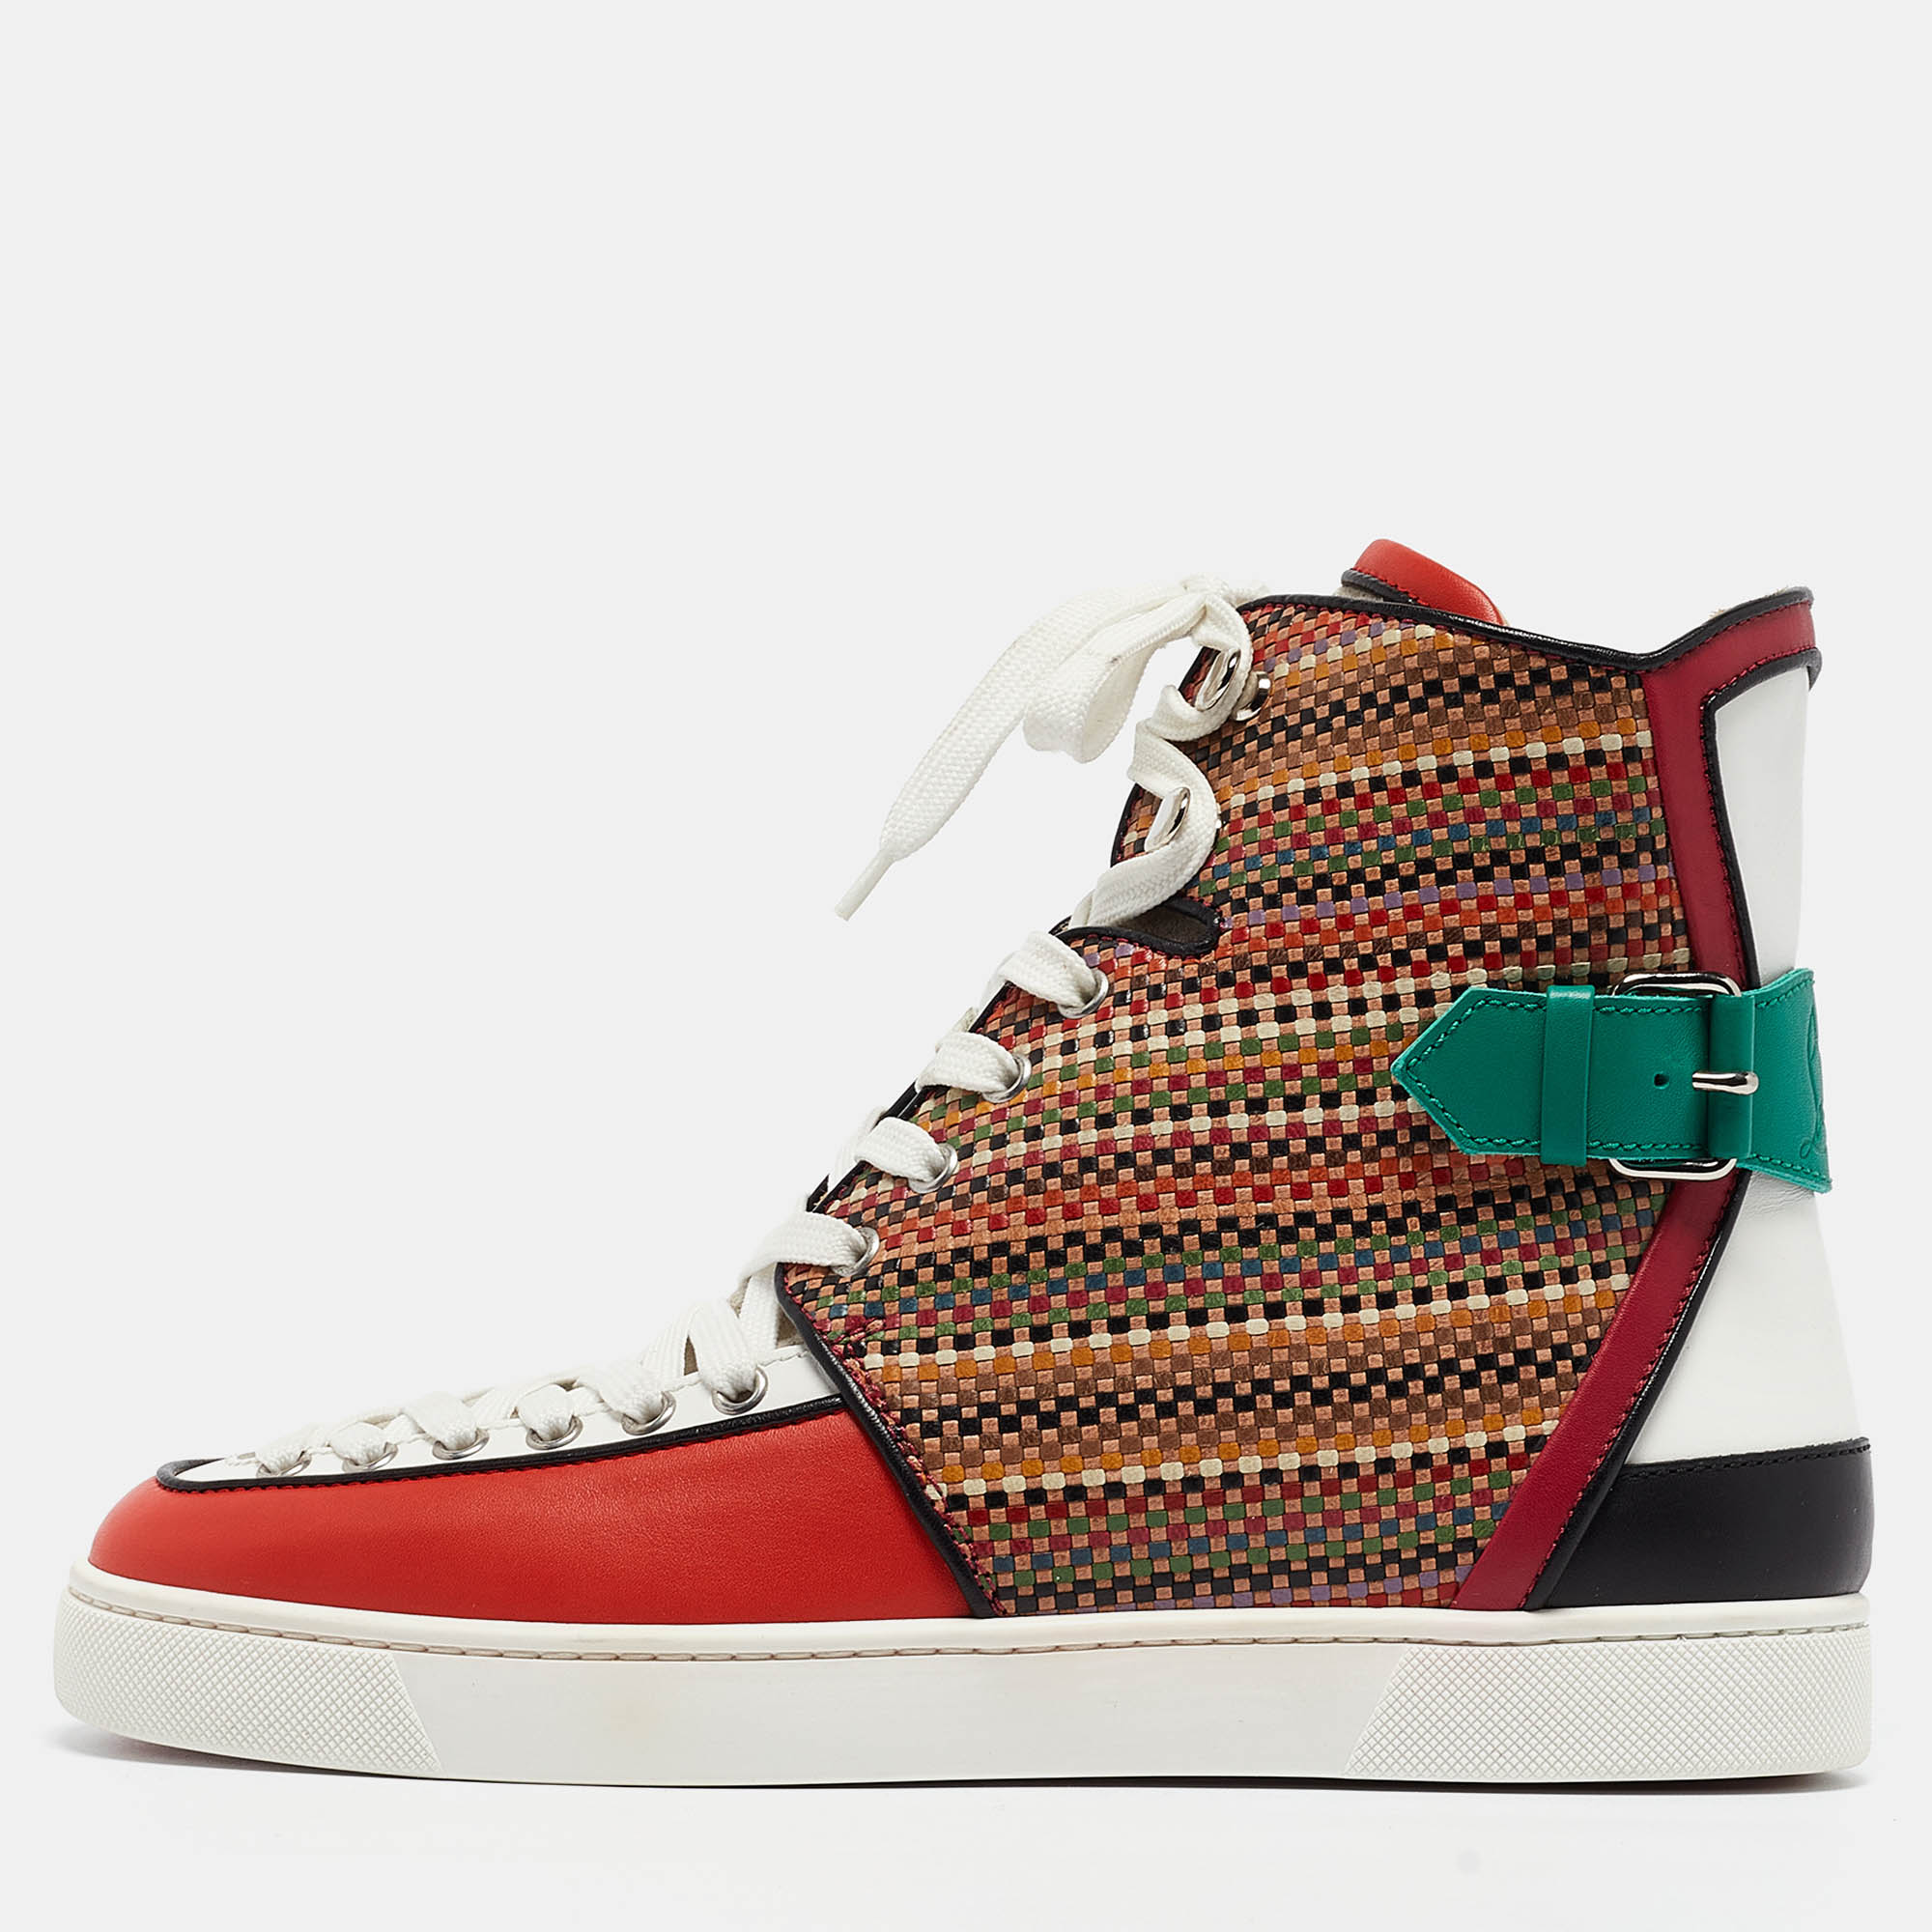 Give your outfit a luxe update with this pair of Christian Louboutin sneakers. The shoes are sewn perfectly to help you make a statement in them for a long time.